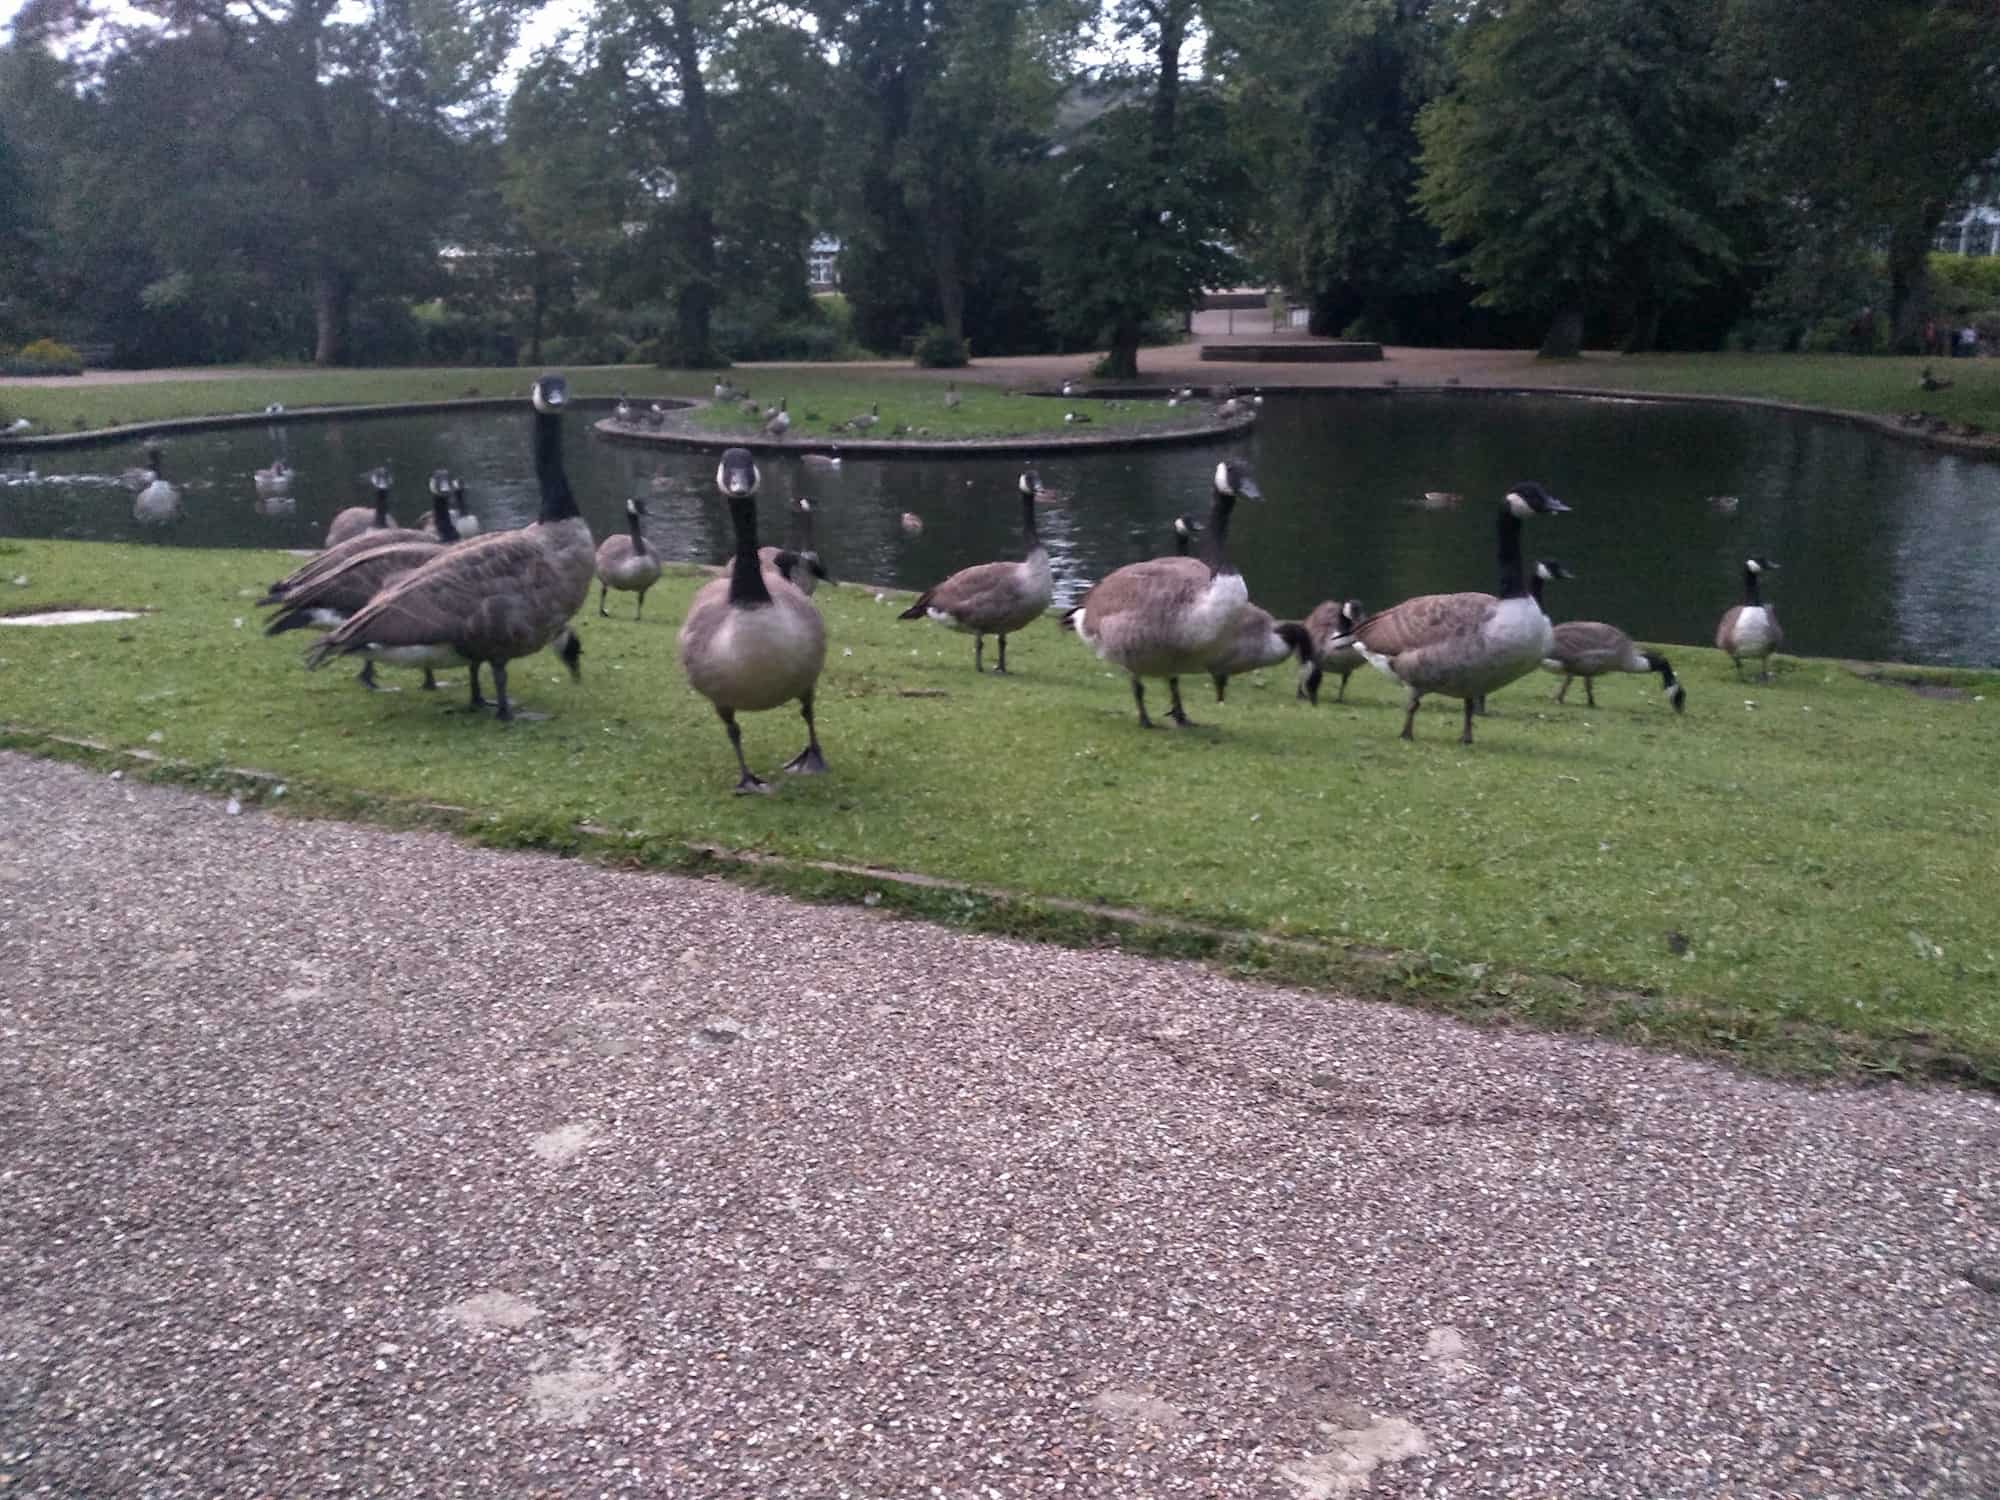 Gaggle of geese in Buxton park near the park lake